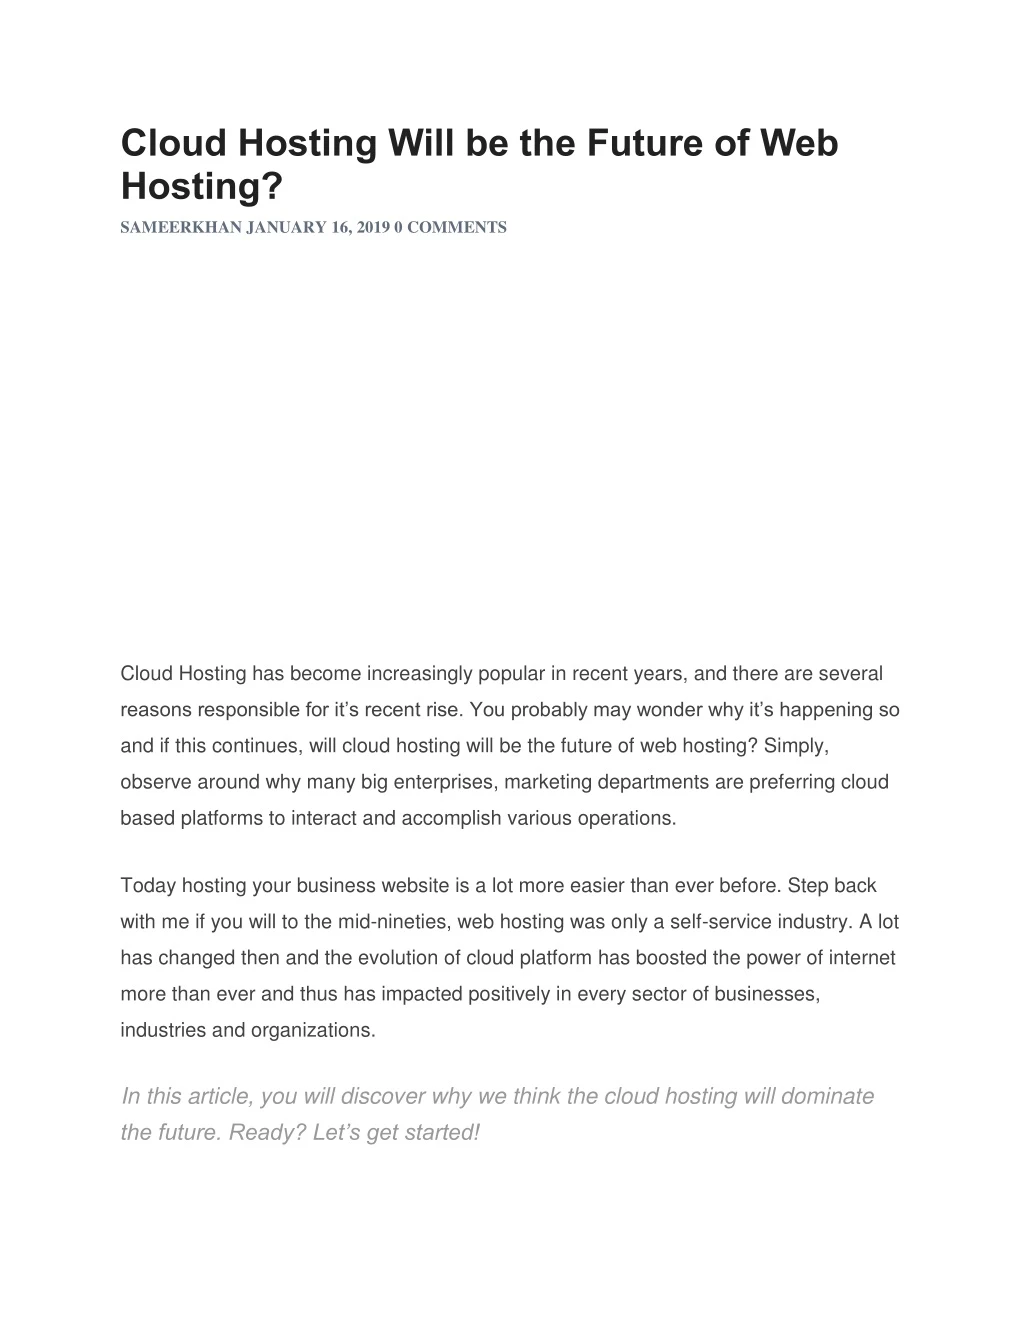 cloud hosting will be the future of web hosting